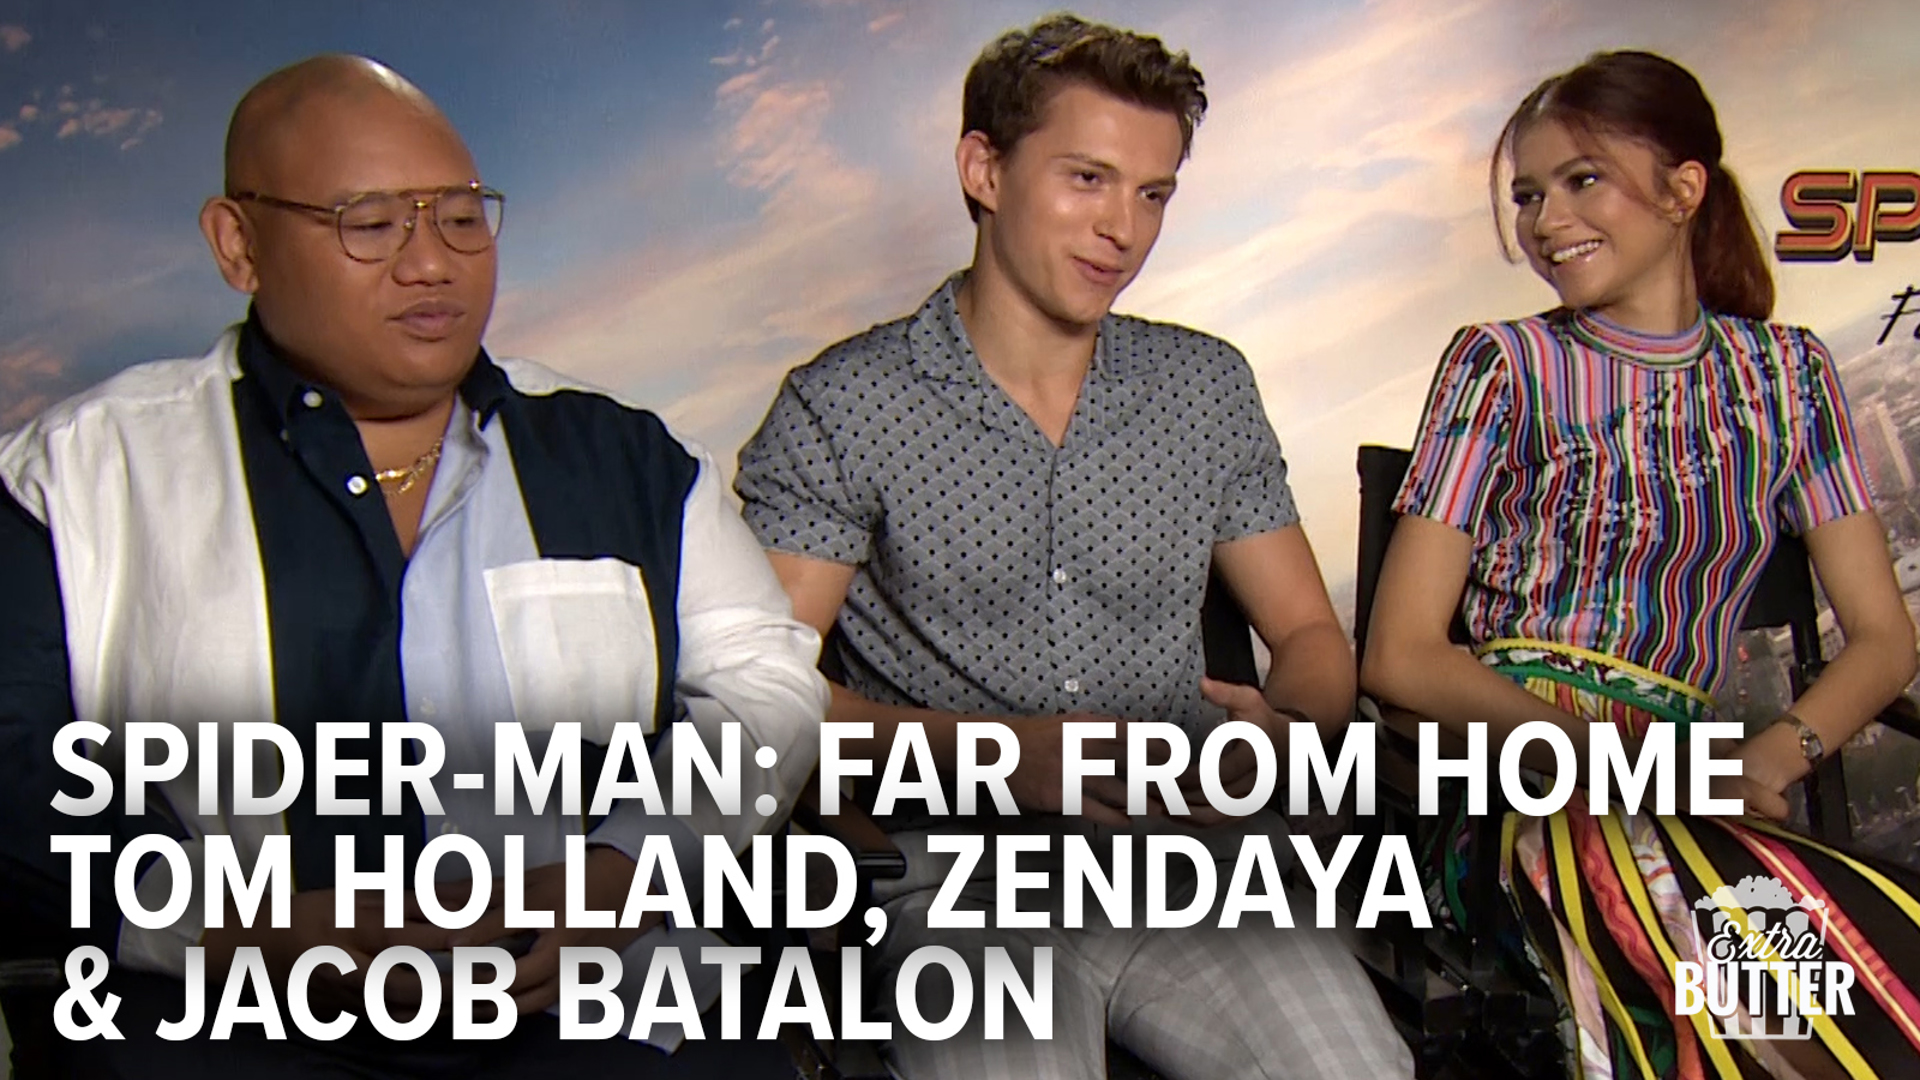 Tom Holland, Zendaya and Jacob Batalon try not to plot spoil while talking about 'Spider-Man: Far From Home.' Tom also tells a funny story about bathroom breaks as Spider-Man.